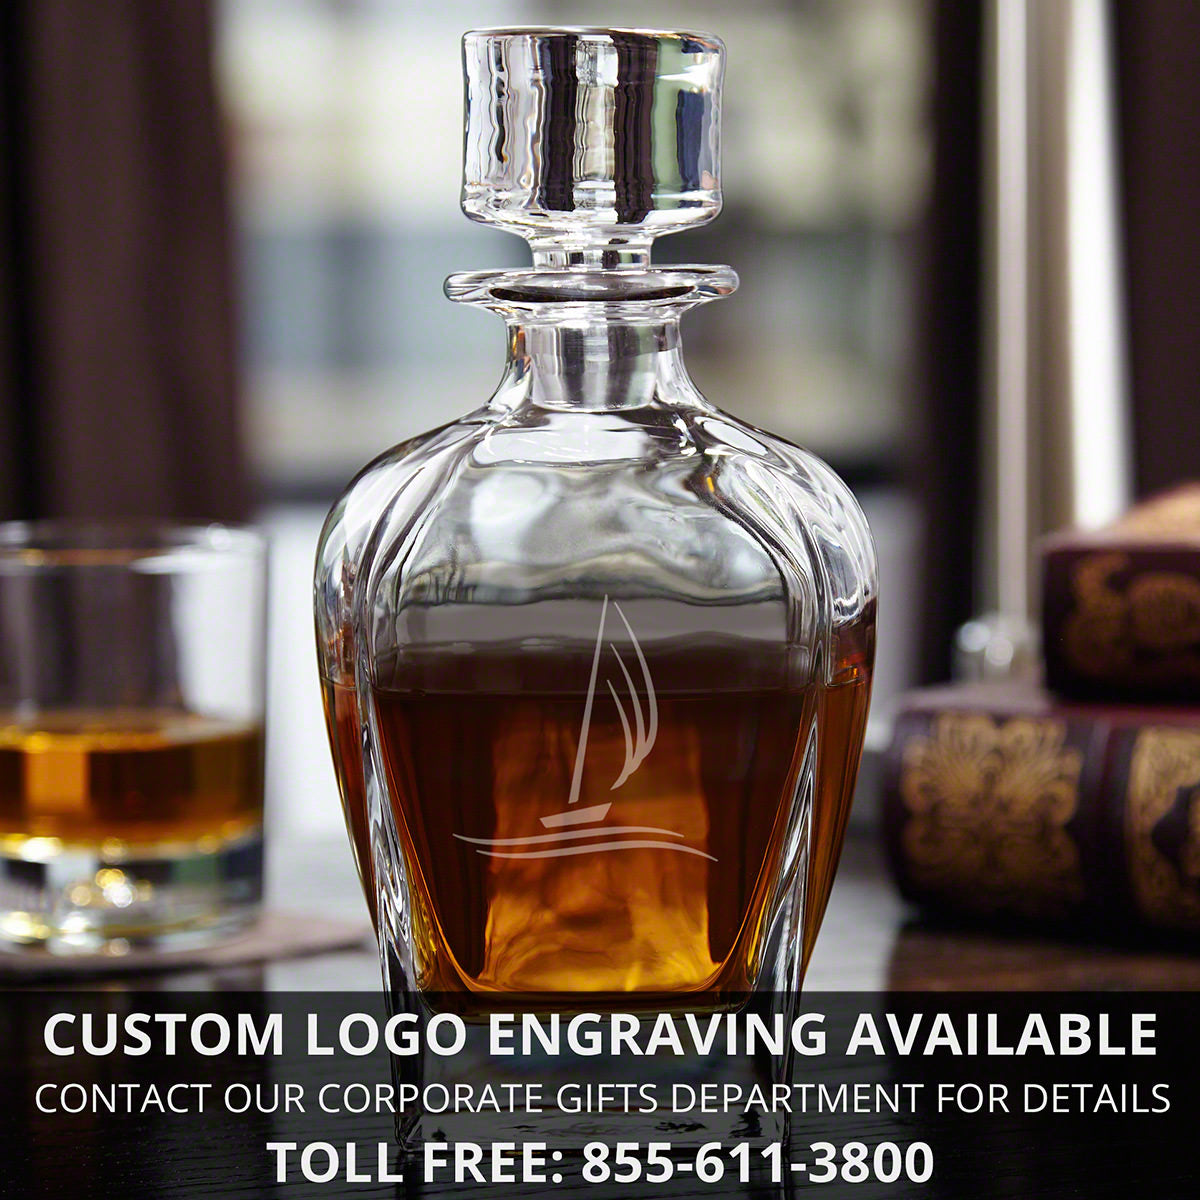 Personalized Bourbon Decanter Set with Glencairn Glasses - 5pc